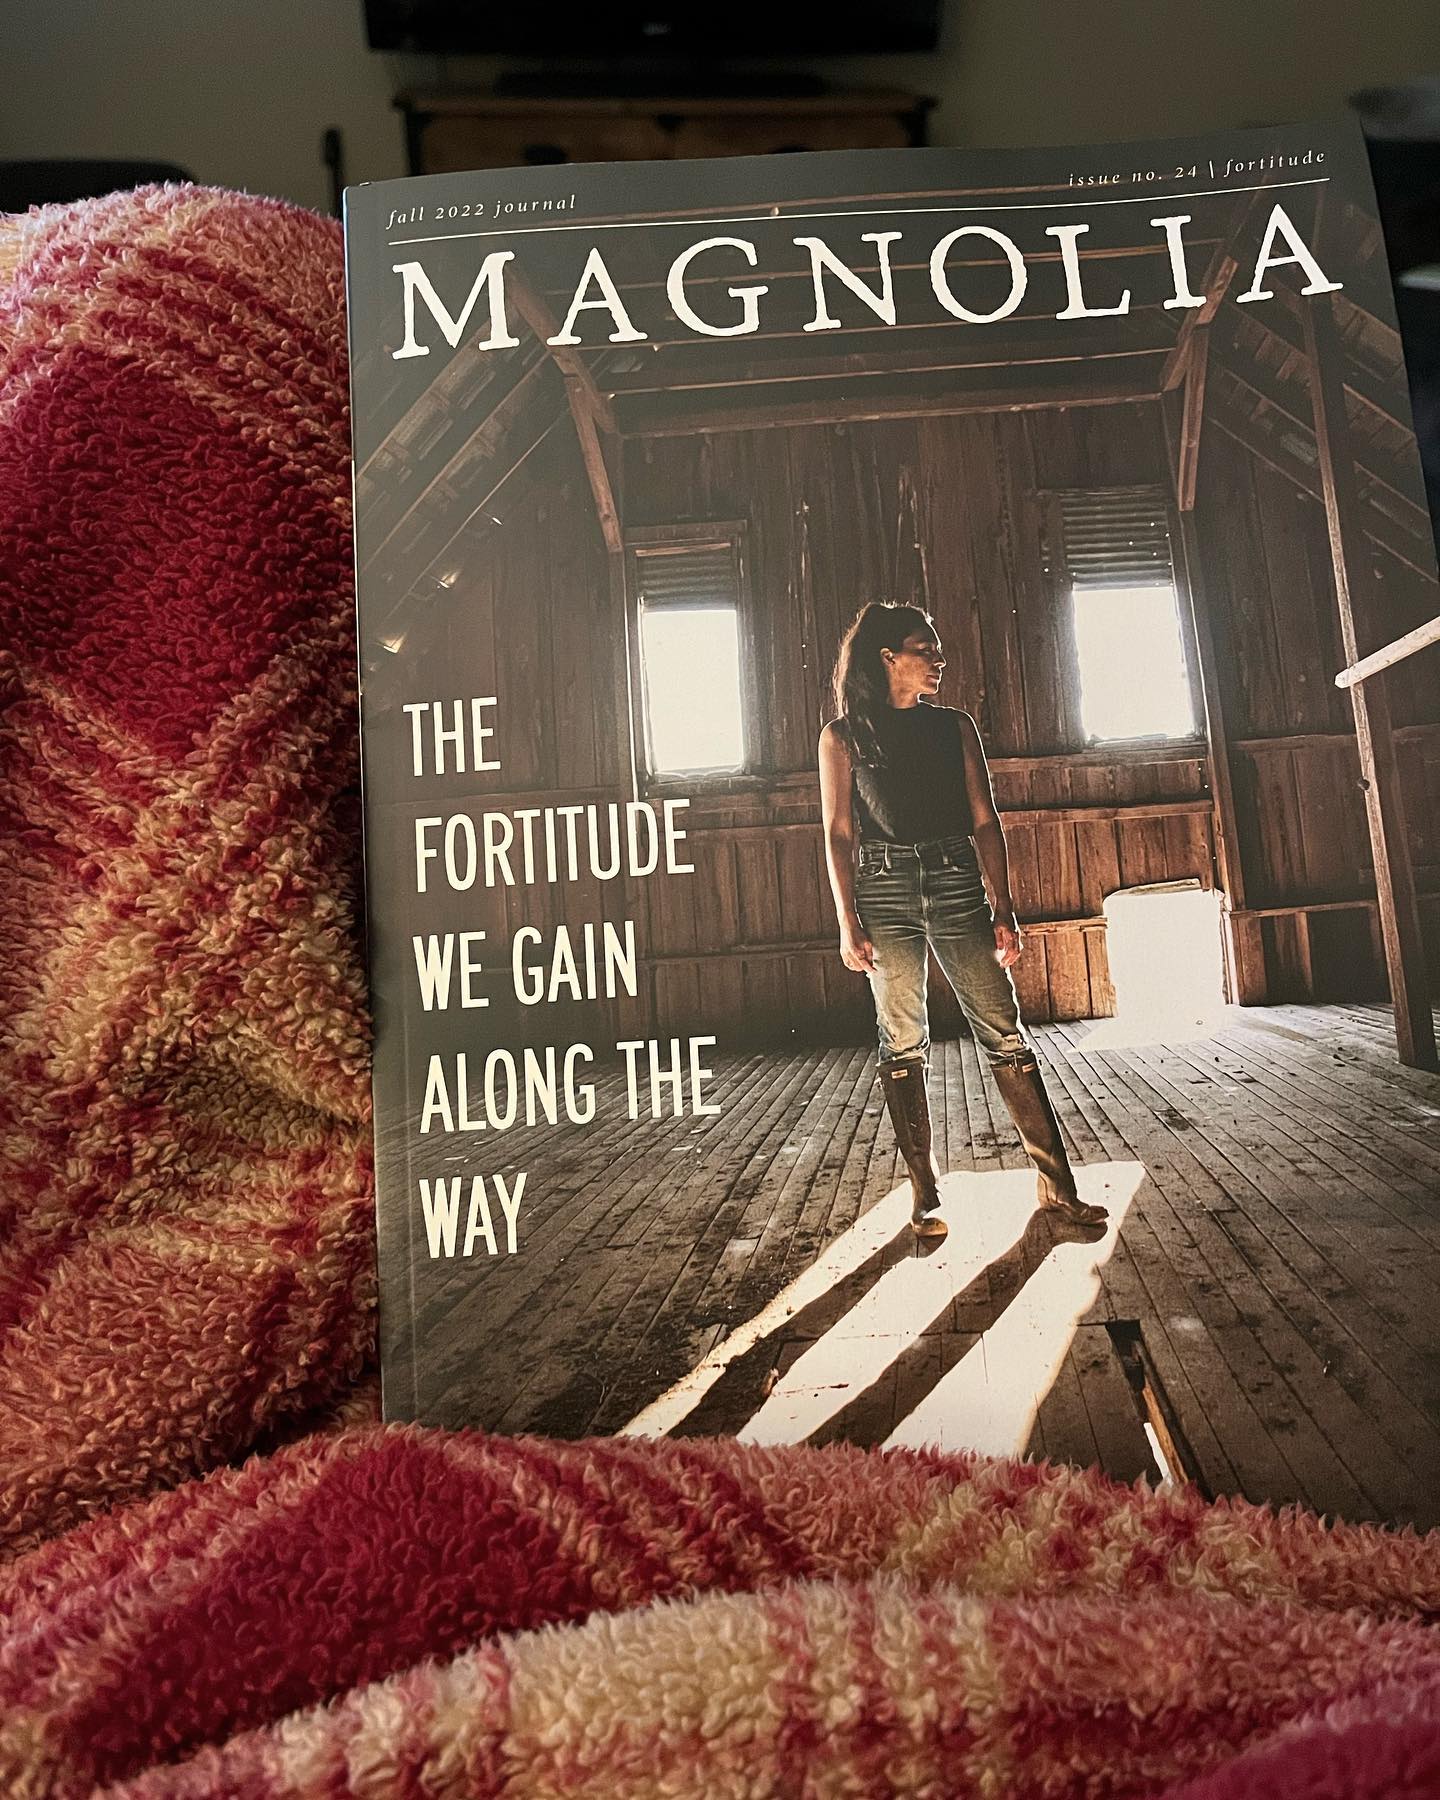 Look what came in the mail today! 😍🍂 Curling up on the couch and reading it front to back pretending like it’s not 90 degrees out 😂 @magnolia @magnolianetwork @joannagaines